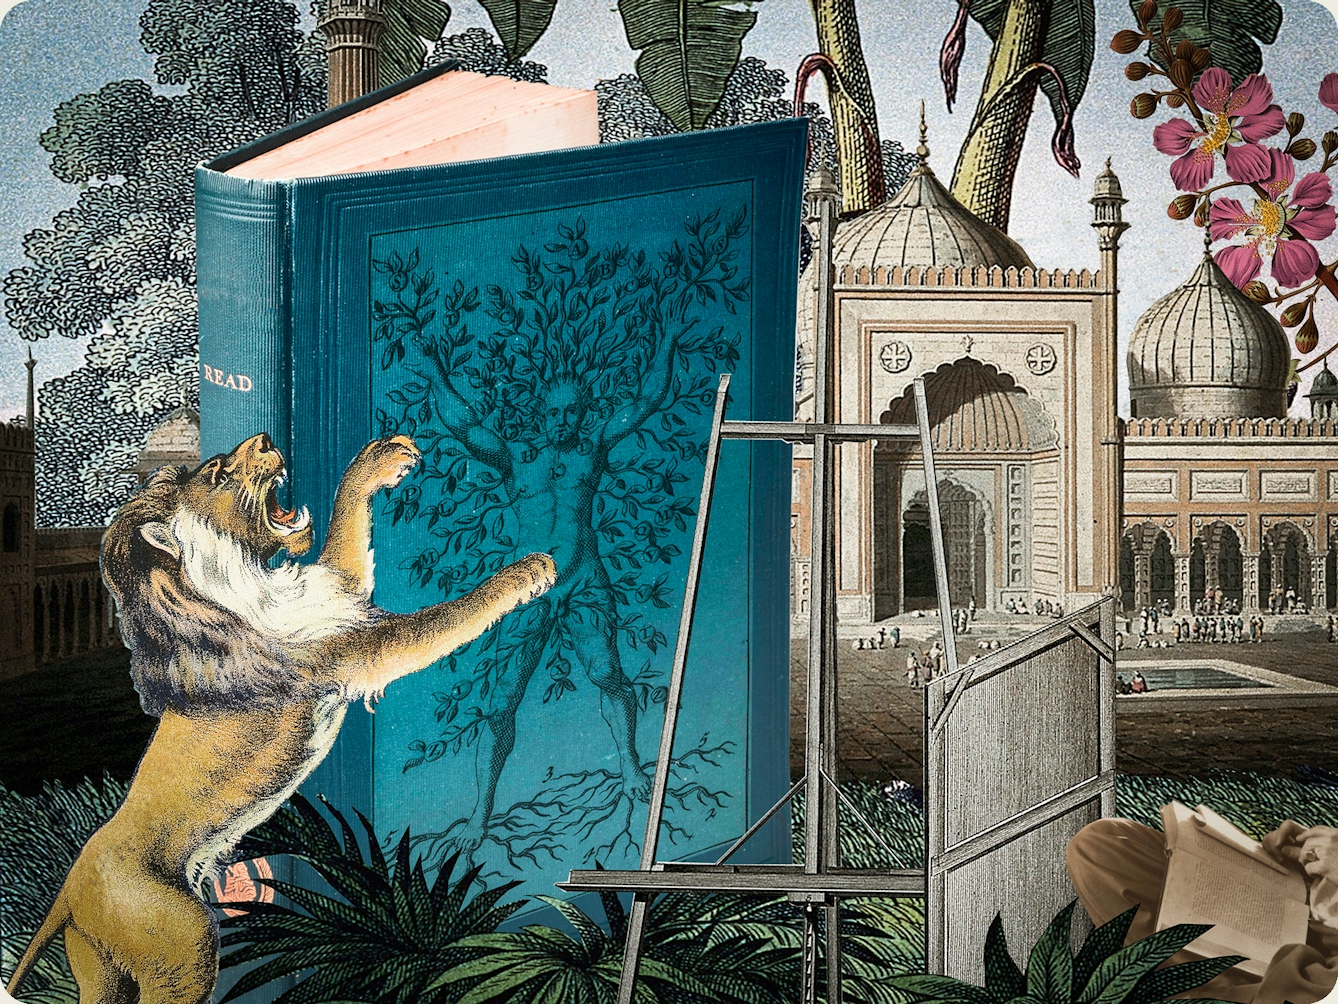 Artwork using collage. The collaged elements are made up of archive material which includes vintage photographs, etchings, painted illustrations, lithographic prints and line drawings. This artwork depicts a scene with an urban and rural combined background. In the middle distance an are tall palm trees and large pink flowers. In the foreground on the left is a lion on his hind legs, mouth open in a roar. Behind and to the right of the lion is a large blue hardback book. On the cover is the figure of a naked man with his arms outstretched above his head. Branches grow out of his arms, torso and legs and roots grow out of his feet. Next to the book is an empty artist's easel with a stretched canvas leaning against it. 